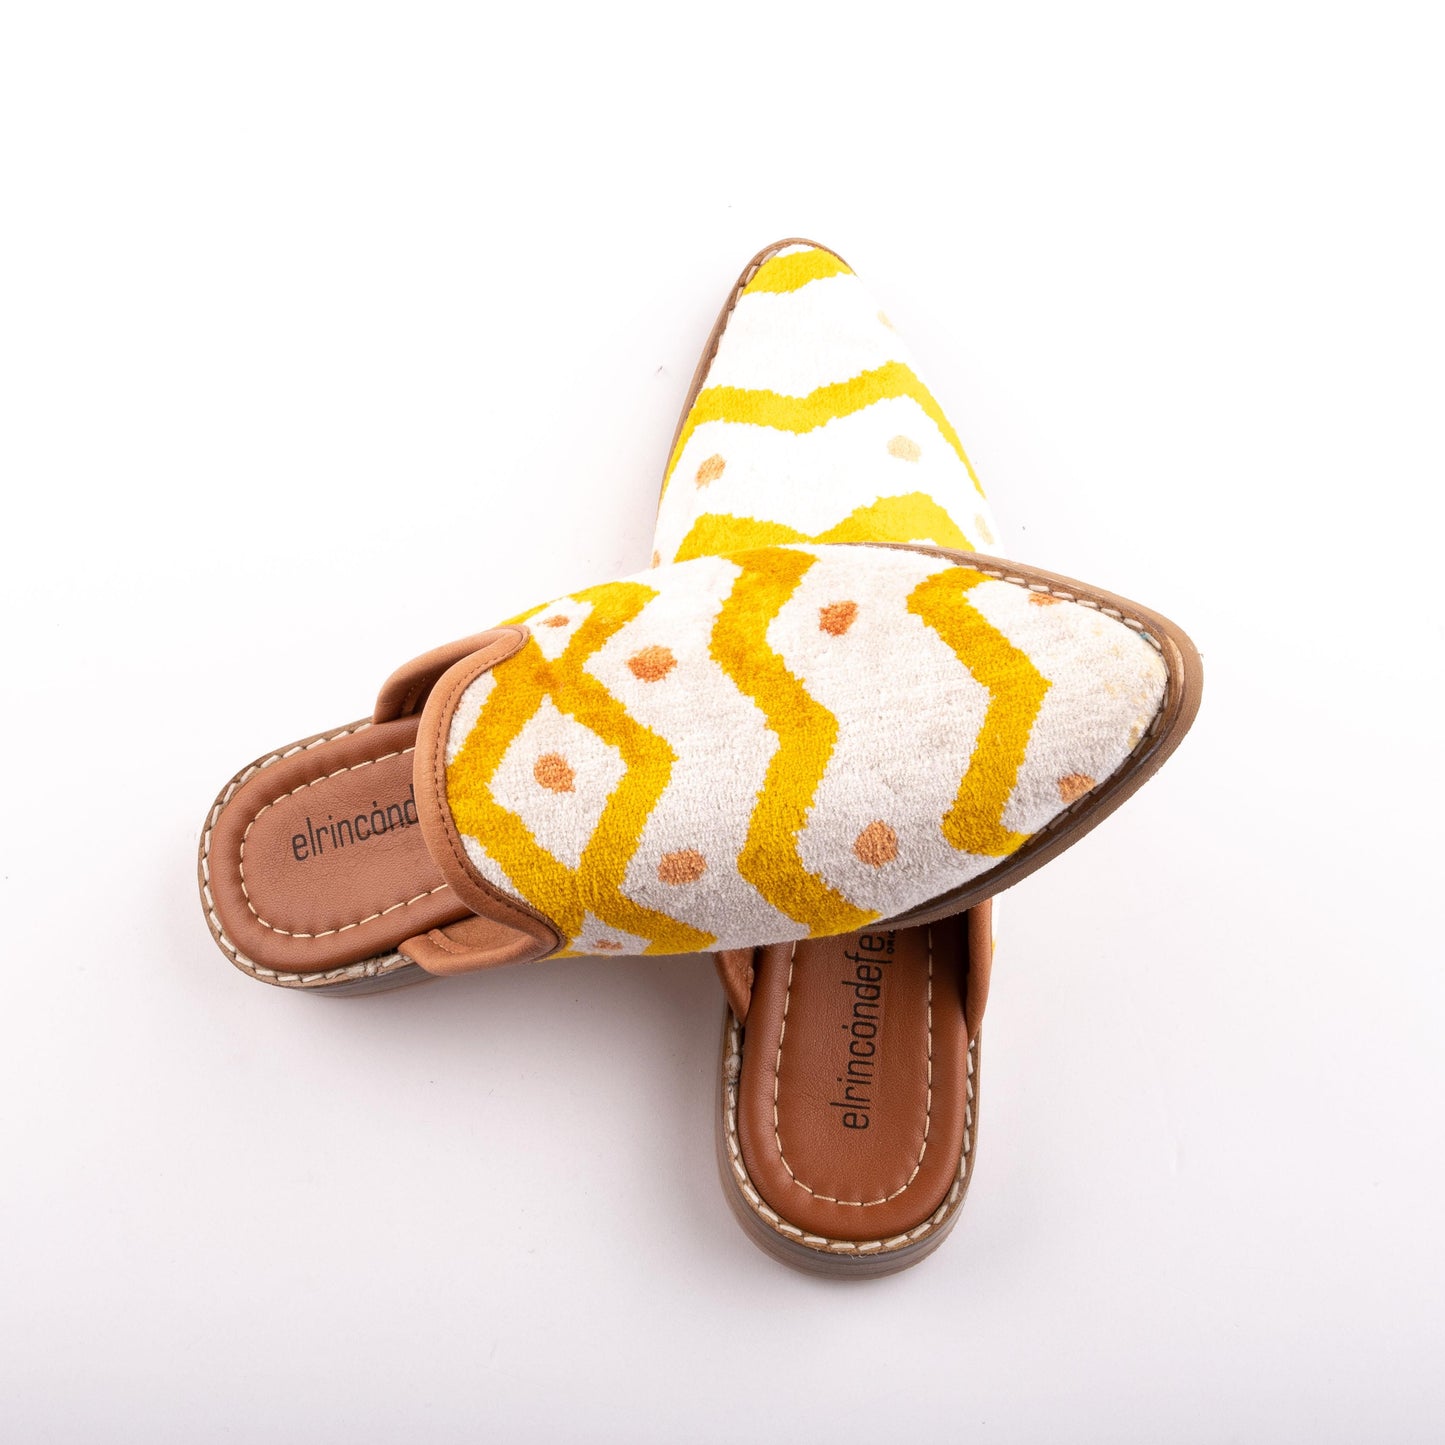 Ethnic Woman Pointed Toe Slipper Crafted From Handmade Velvet and Real Leather Size 4.5 - Base Width: 8 cm - Base Length: 15 cm - Heel:  1.5 cm